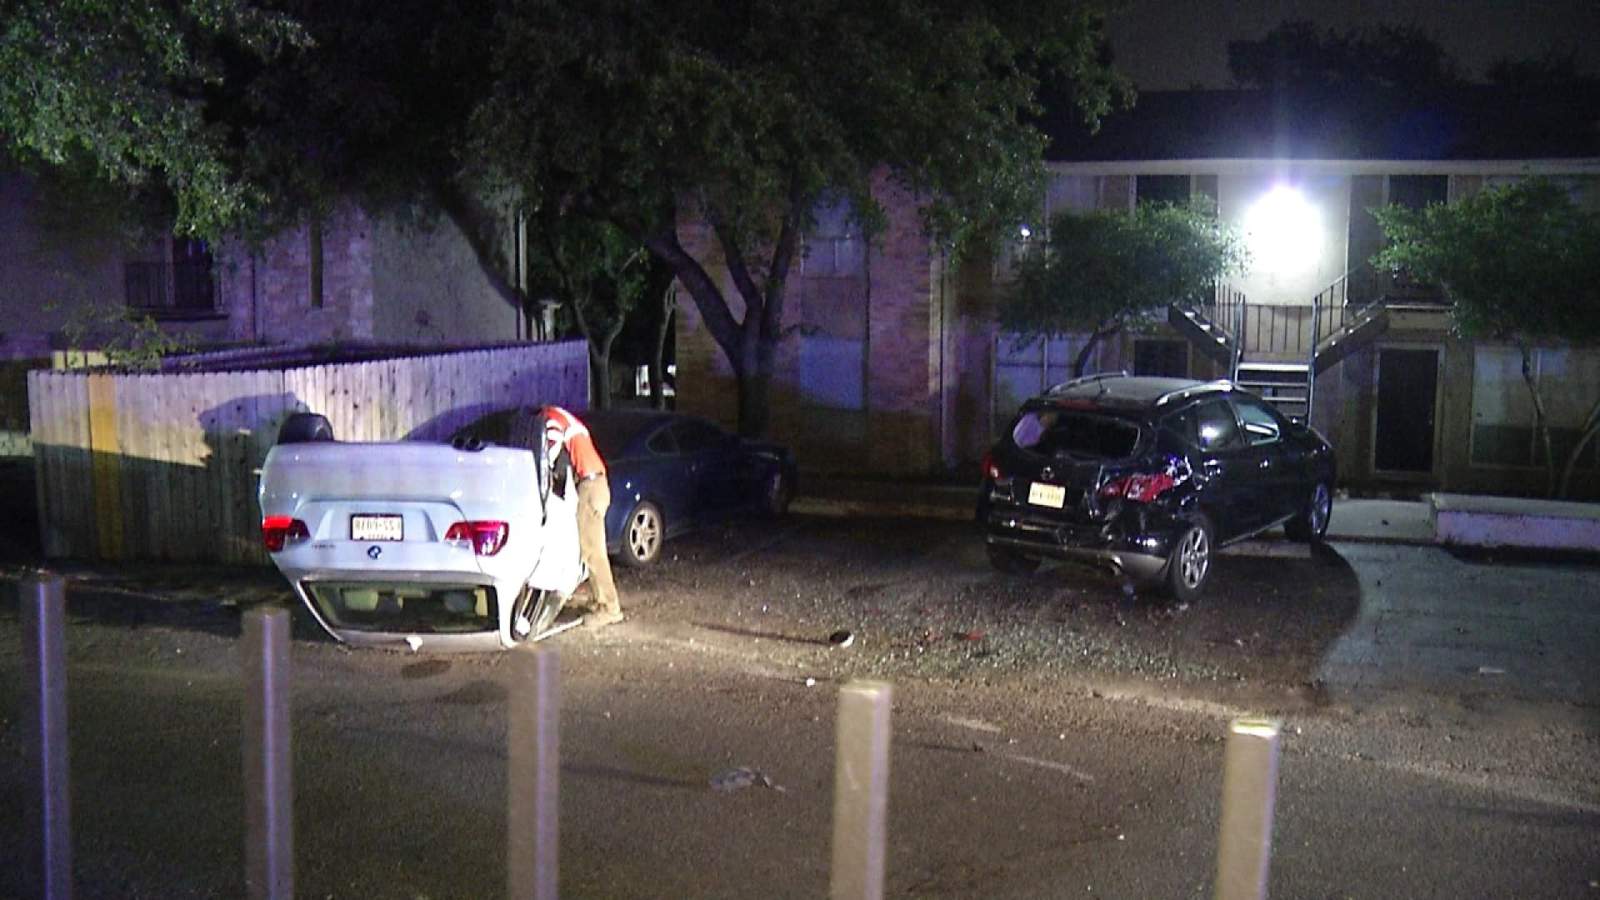 Driver sought after rollover crash at NW Side apartment complex